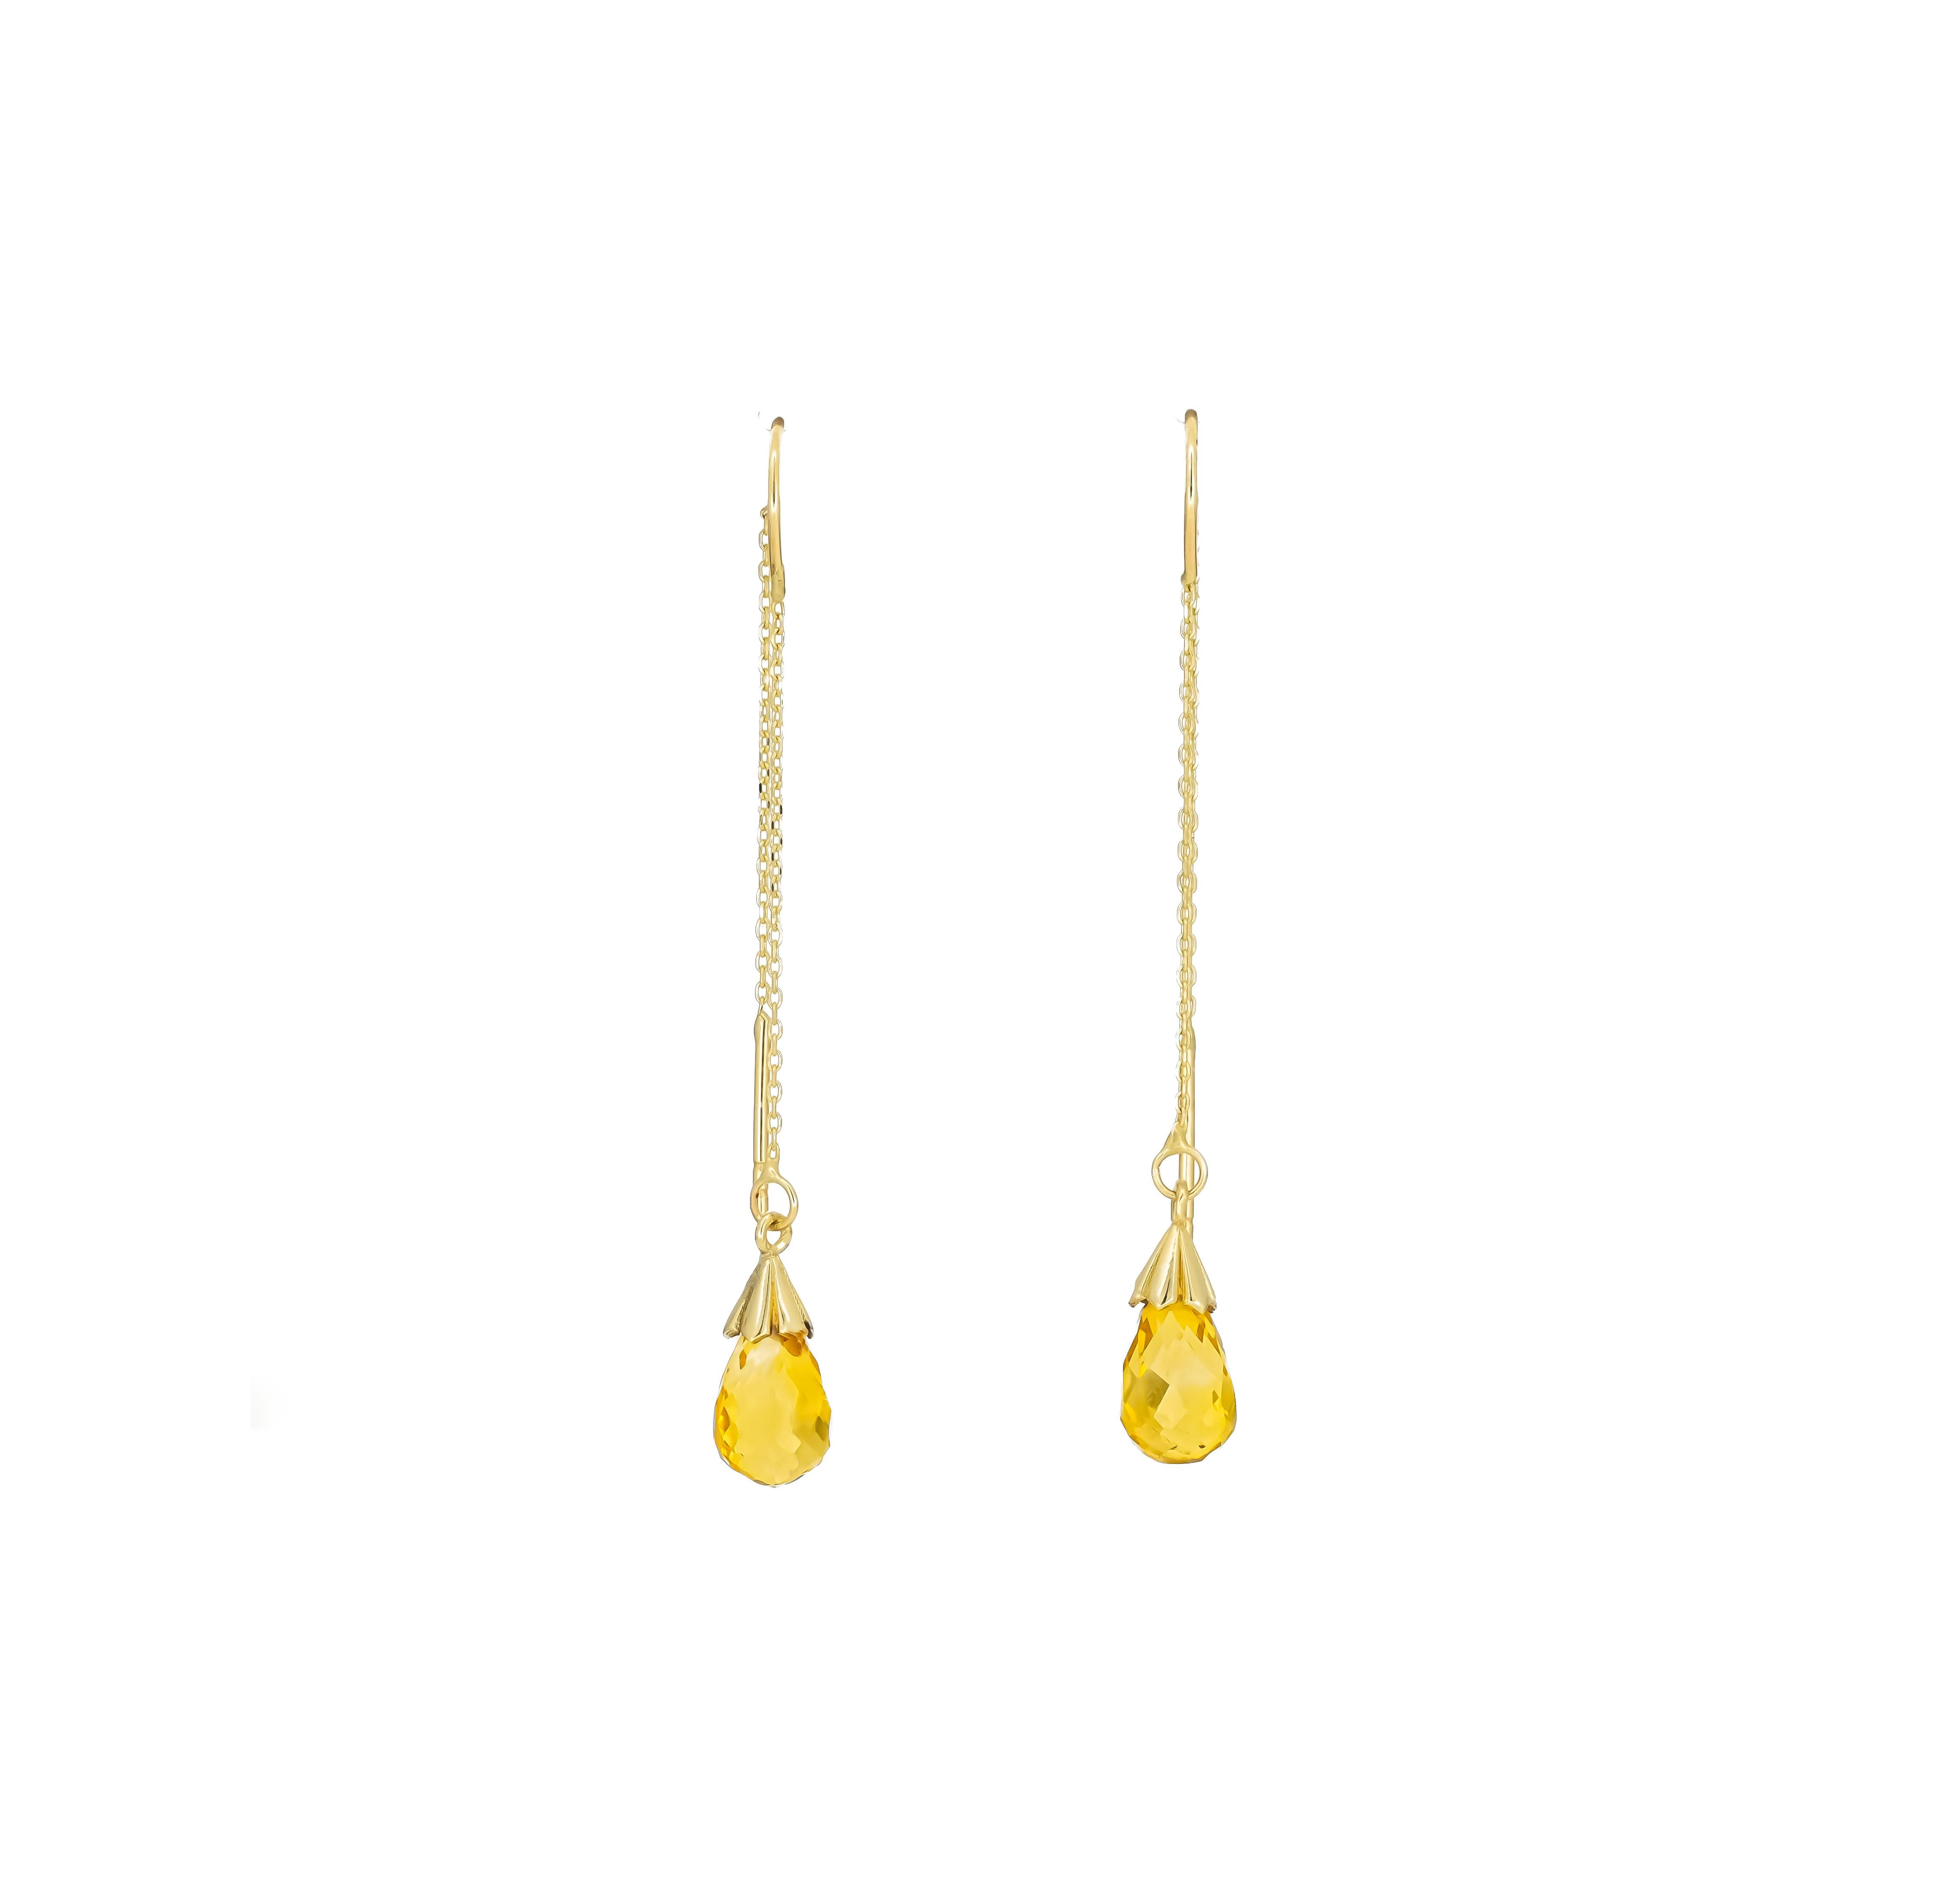 Briolette Cut 14 k yellow gold Threader earrings with citrines.  For Sale